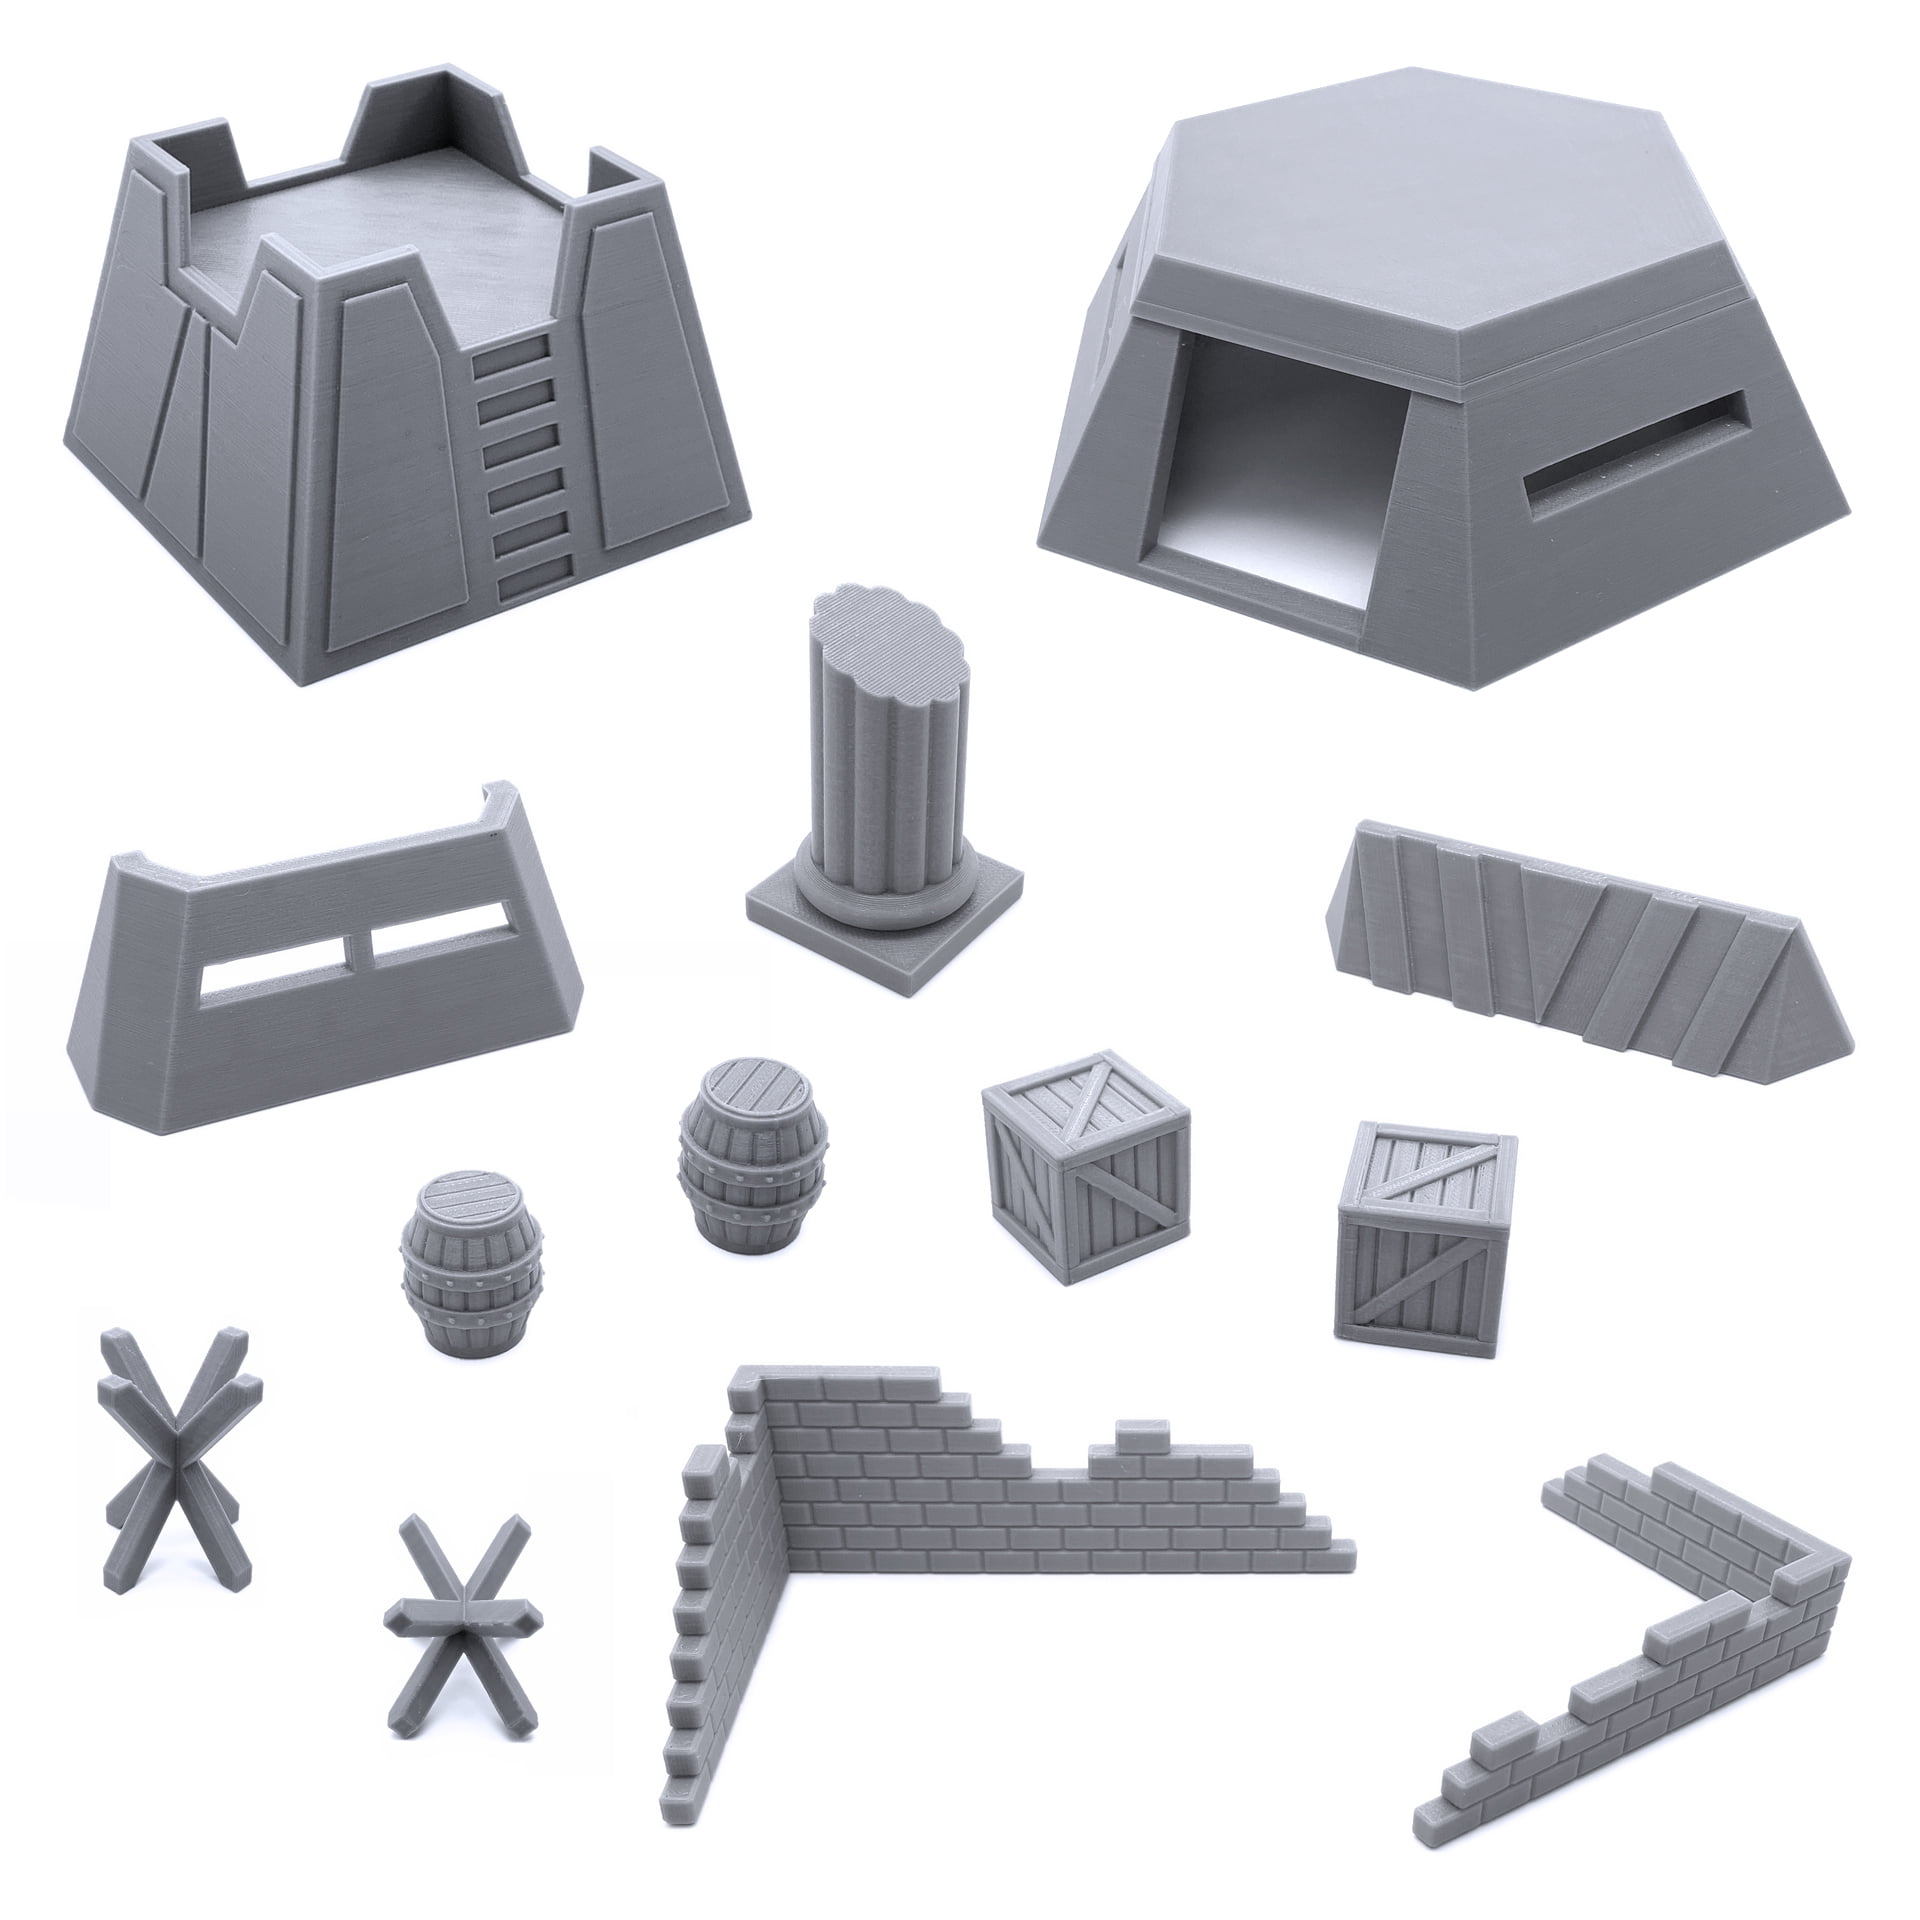 Scenery Bundle, Terrain Scenery for Tabletop 28mm Miniatures Wargame, 3D  Printed and Paintable, EnderToys